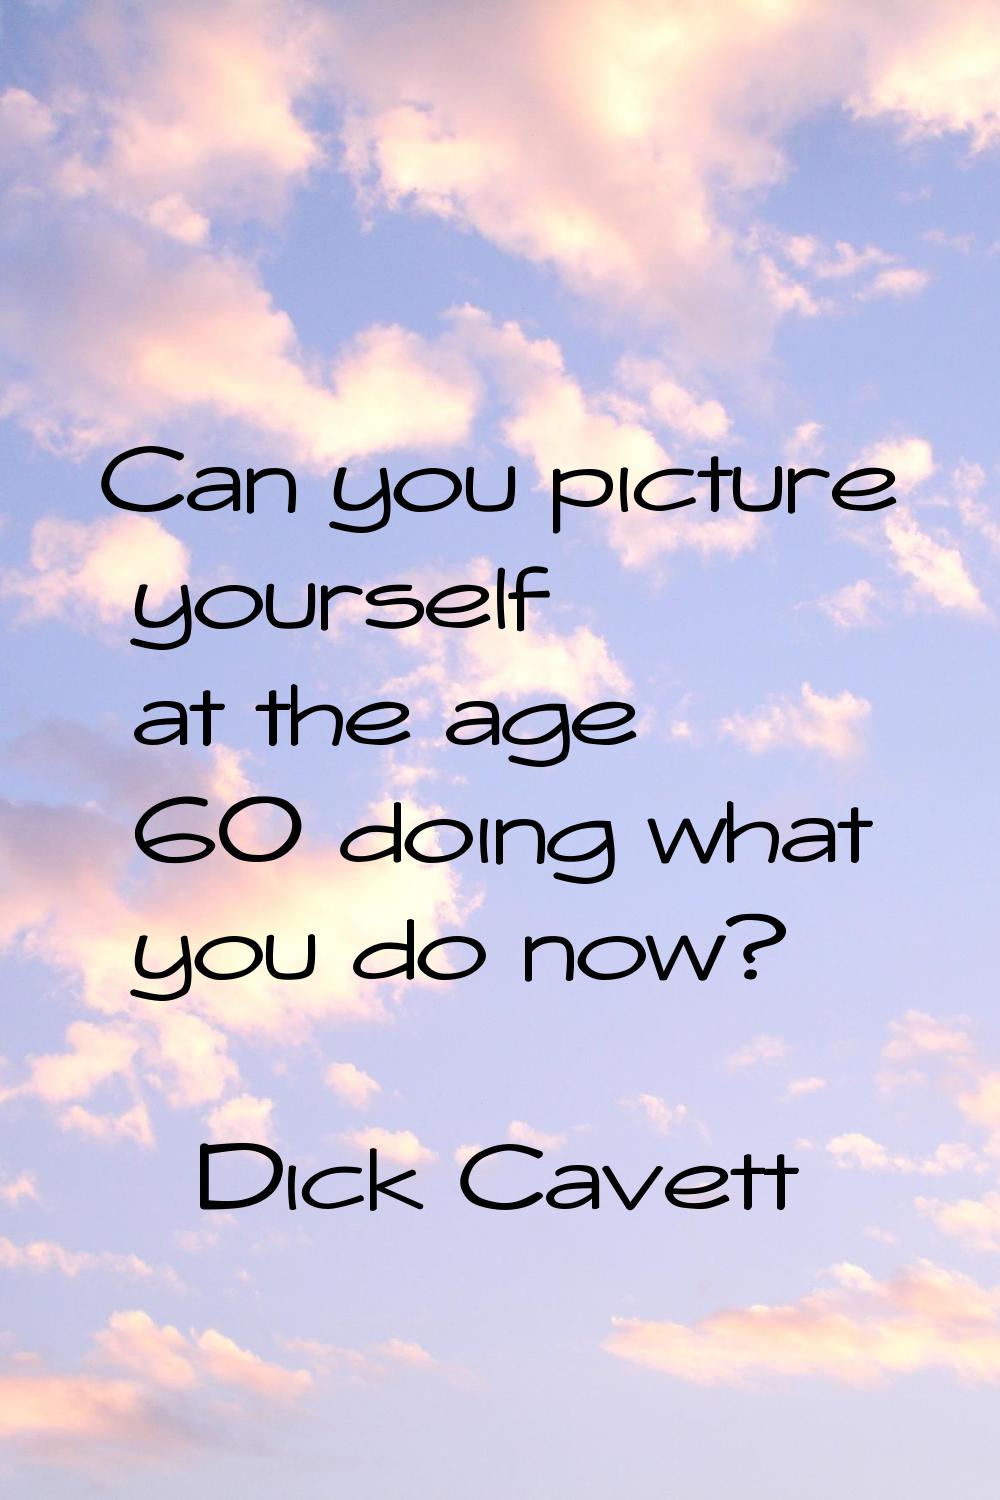 Can you picture yourself at the age 60 doing what you do now?